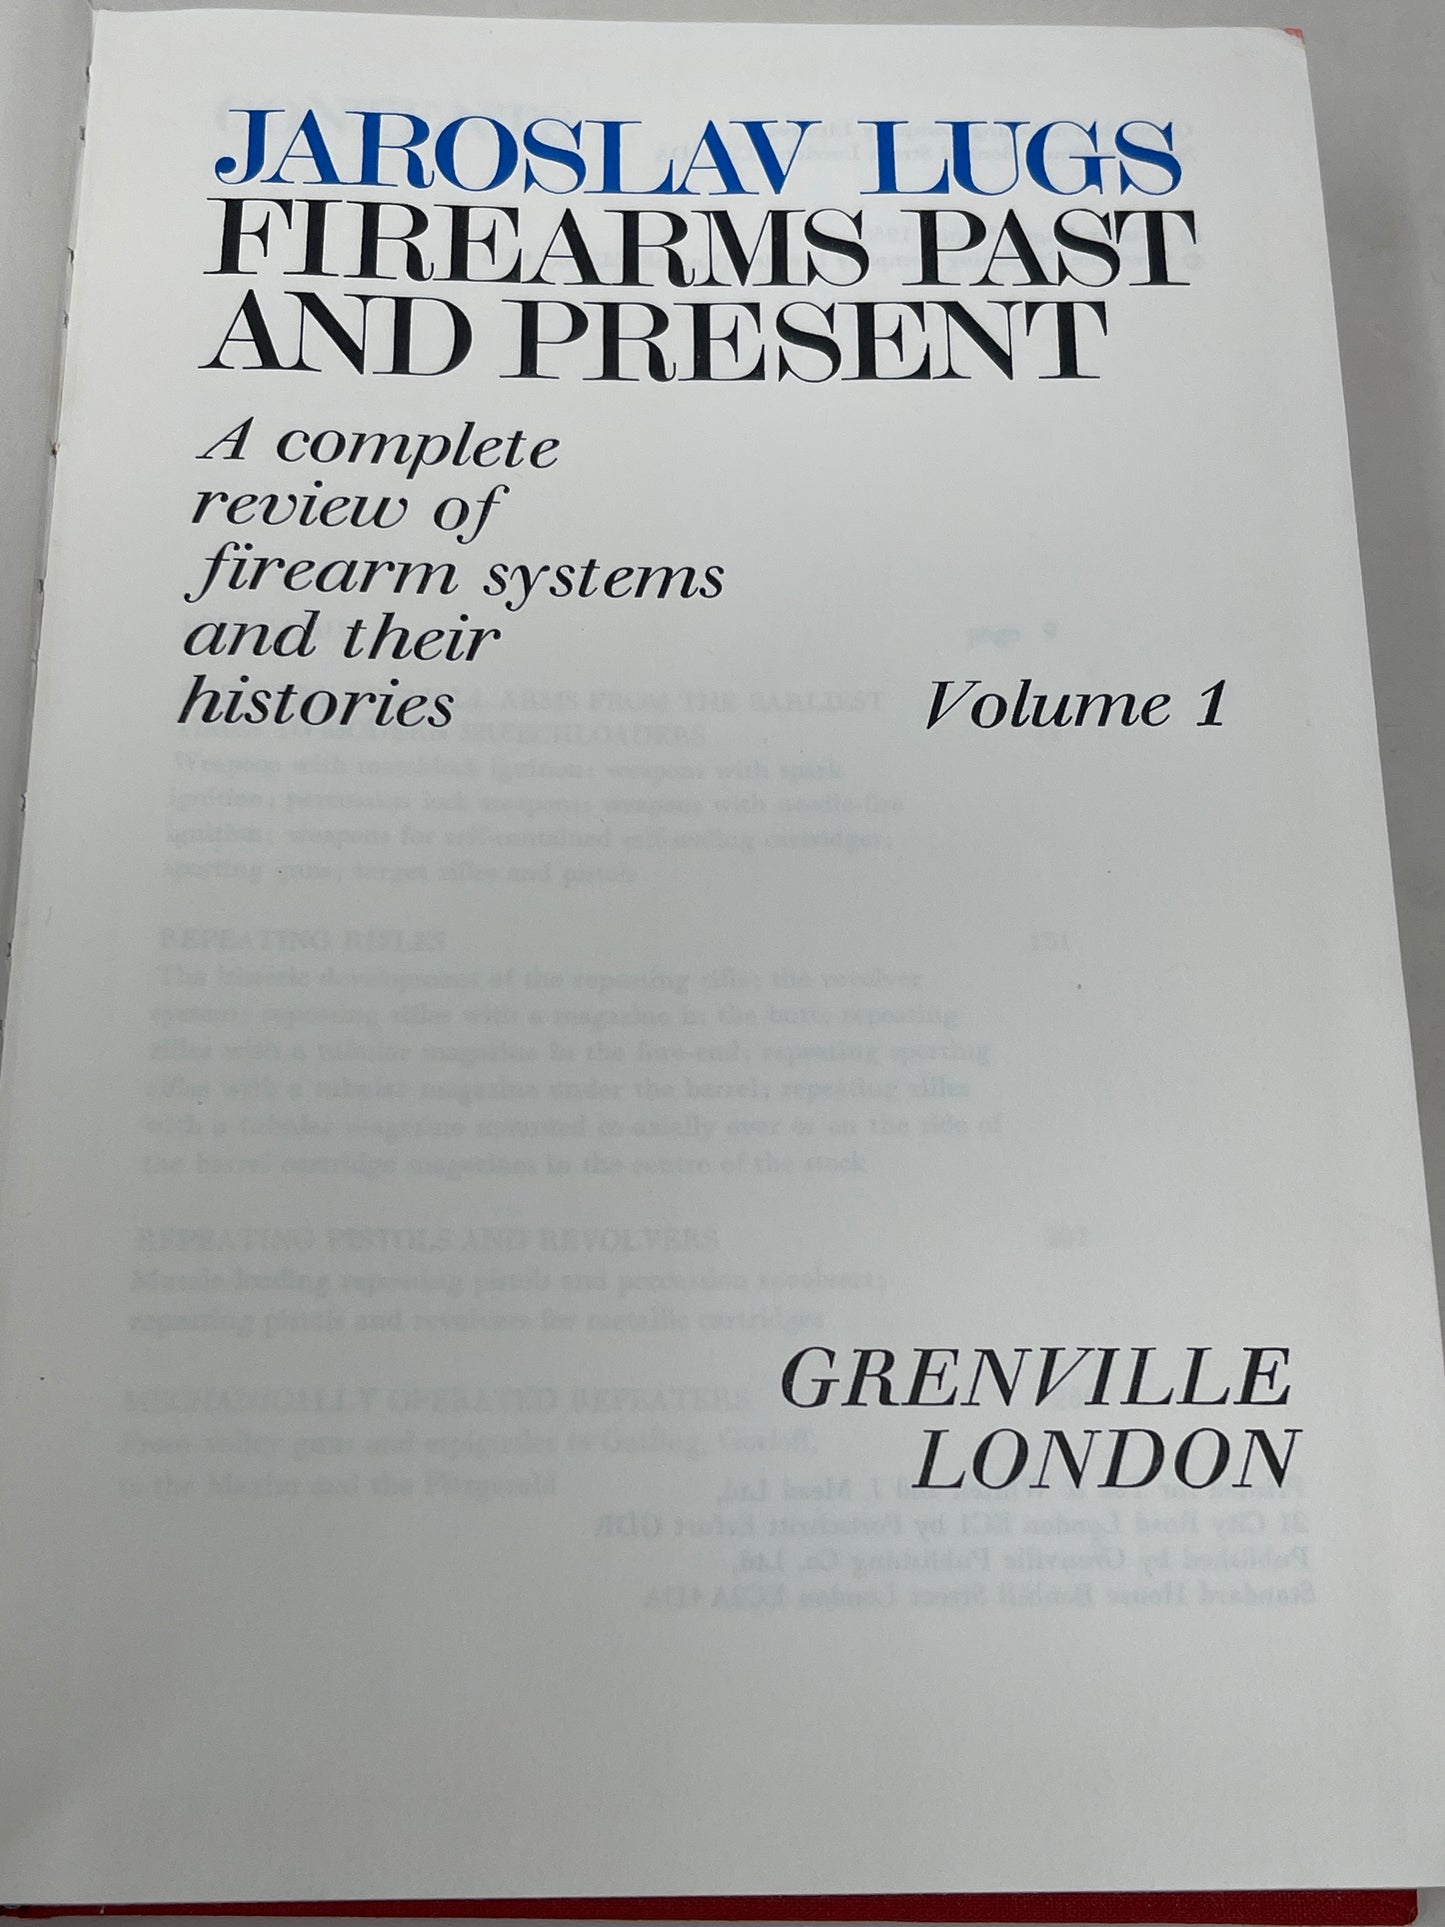 Firearms past and present. A complete review of firearm systems and their histories. Vol. 1: Hardcover – 1 Jan. 1973